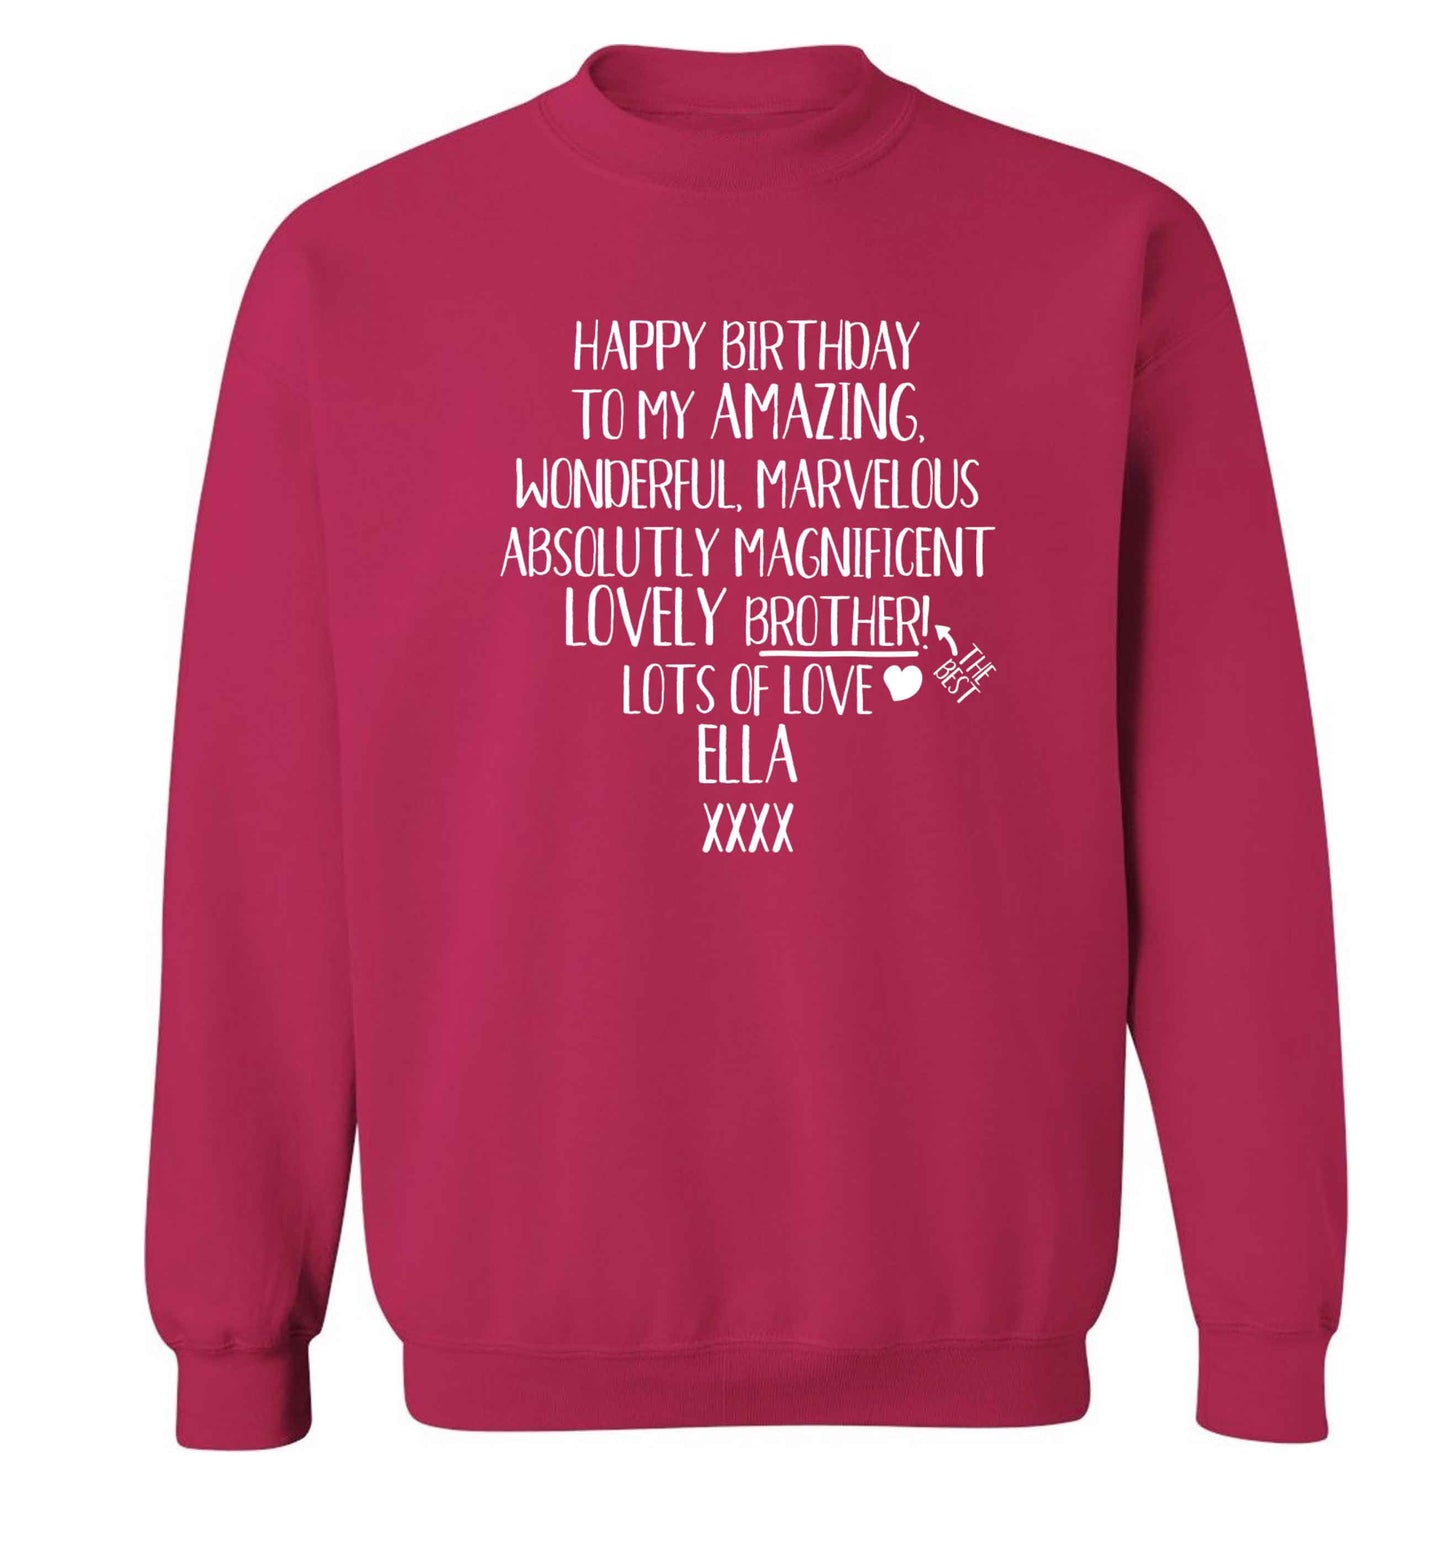 Personalised happy birthday to my amazing, wonderful, lovely brother Adult's unisex pink Sweater 2XL